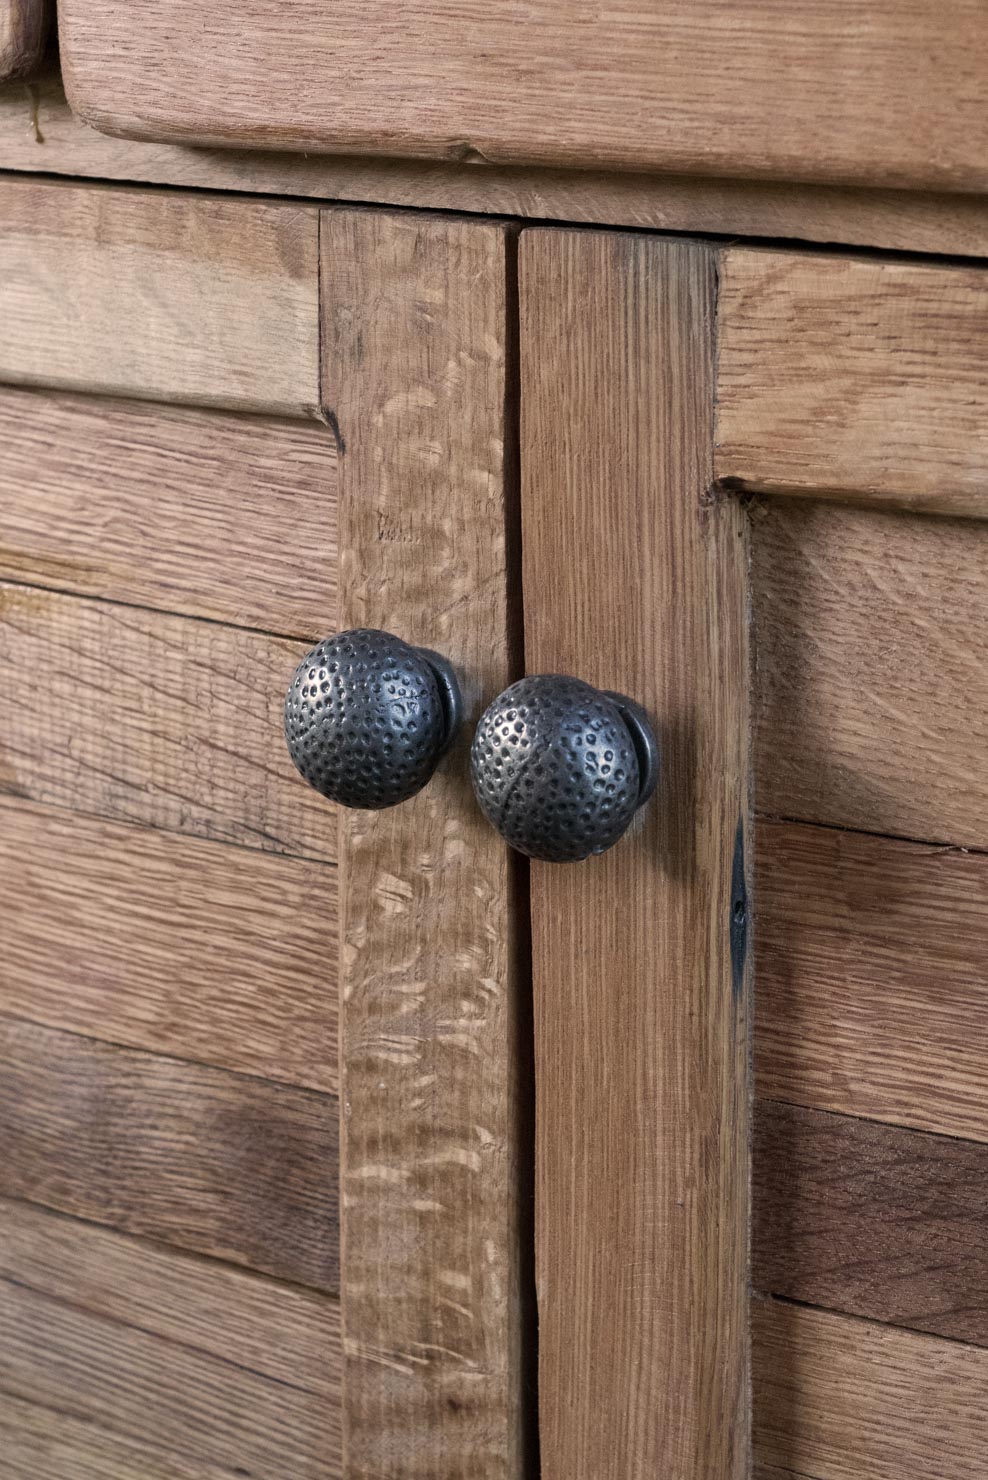 Close-up image of a wooden cabinet with two textured round metal knobs. The wood has a slightly rough, rustic finish with a natural brown hue and visible grain patterns. The knobs are spherical, dark, and feature a dimpled surface, adding an antique or vintage look to the cabinet.